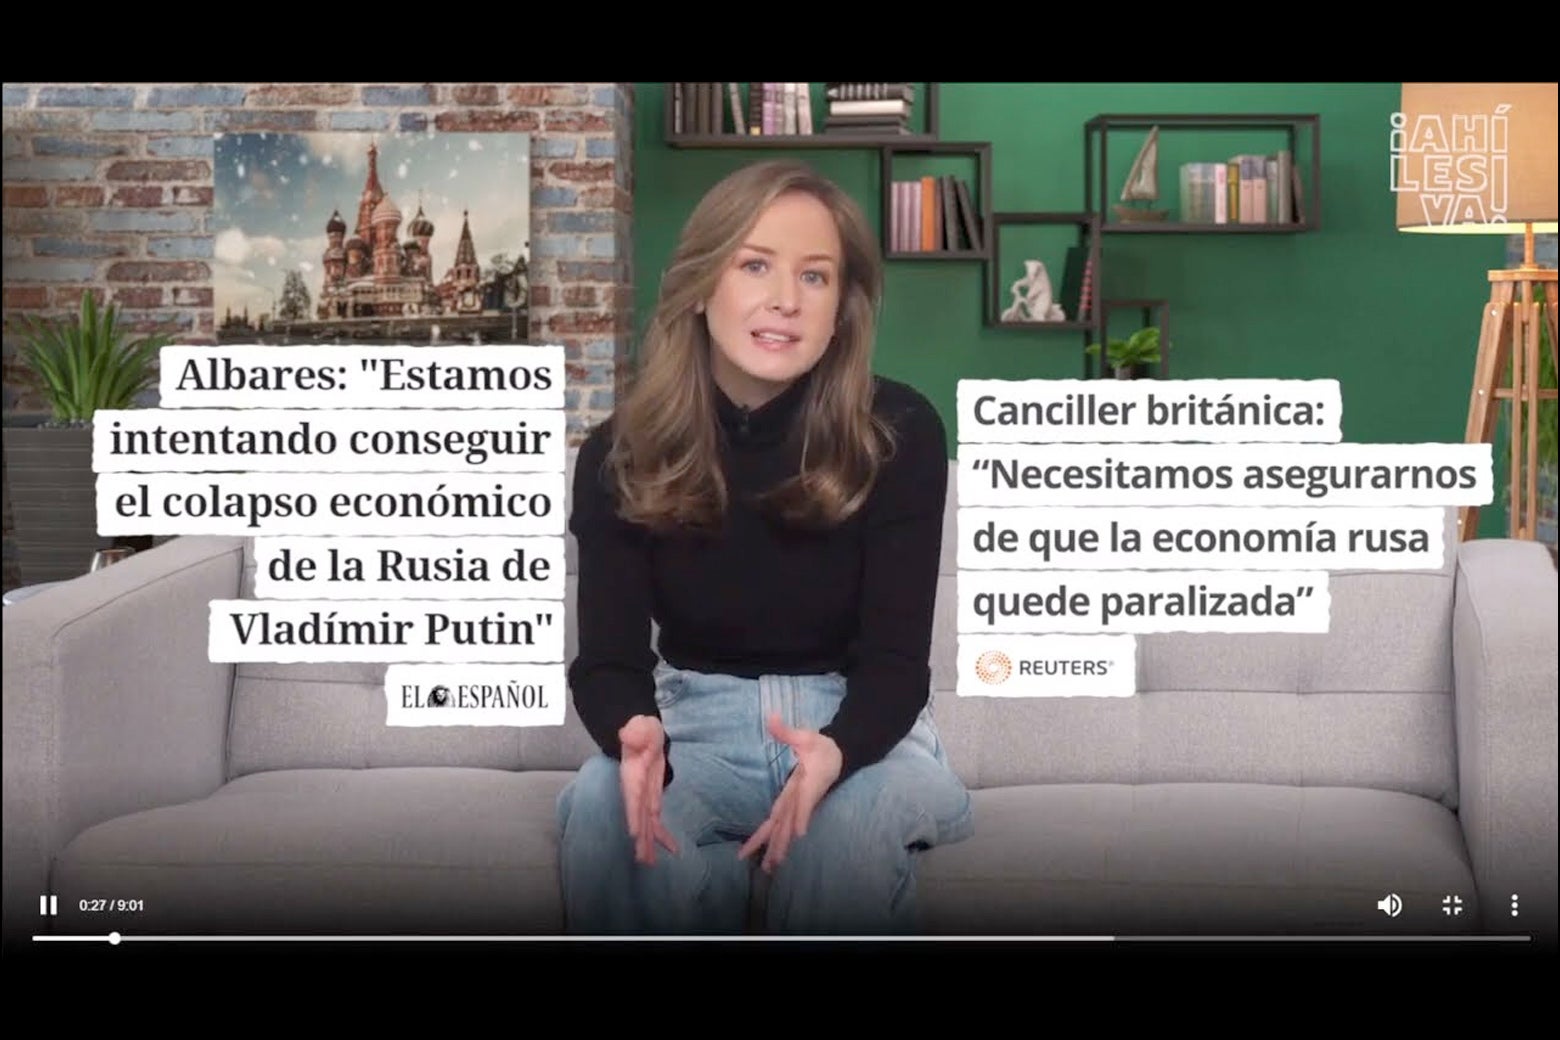 A screenshot of a YouTube show from the Russian-backed program Ahi les Va. Host Inna Afinogenova is seated on a couch in a well decorated living room, and superimposed on the screen next to her are mainstream media headlines, in Spanish, about Russia's economy.